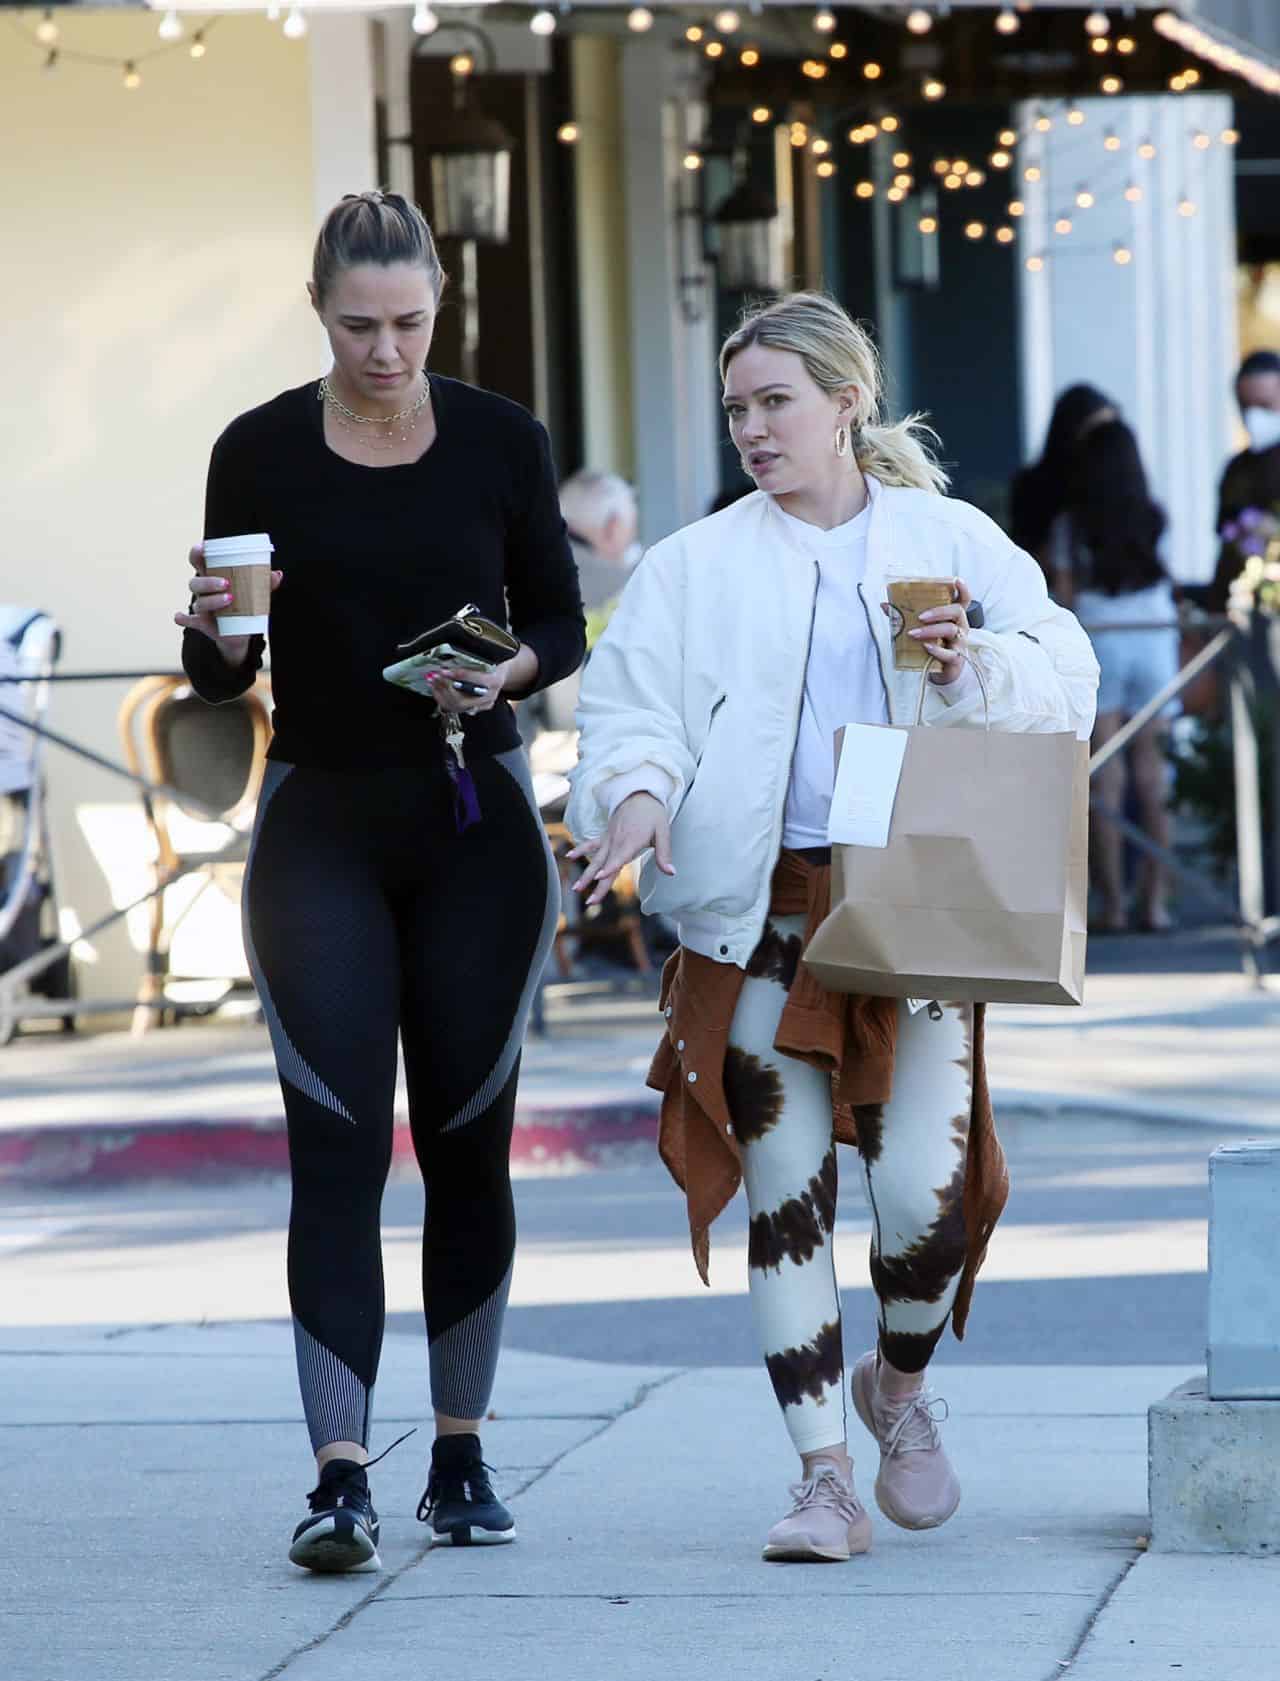 Hilary Duff Stuns in a Bomber Jacket During a Coffee Run After the Gym